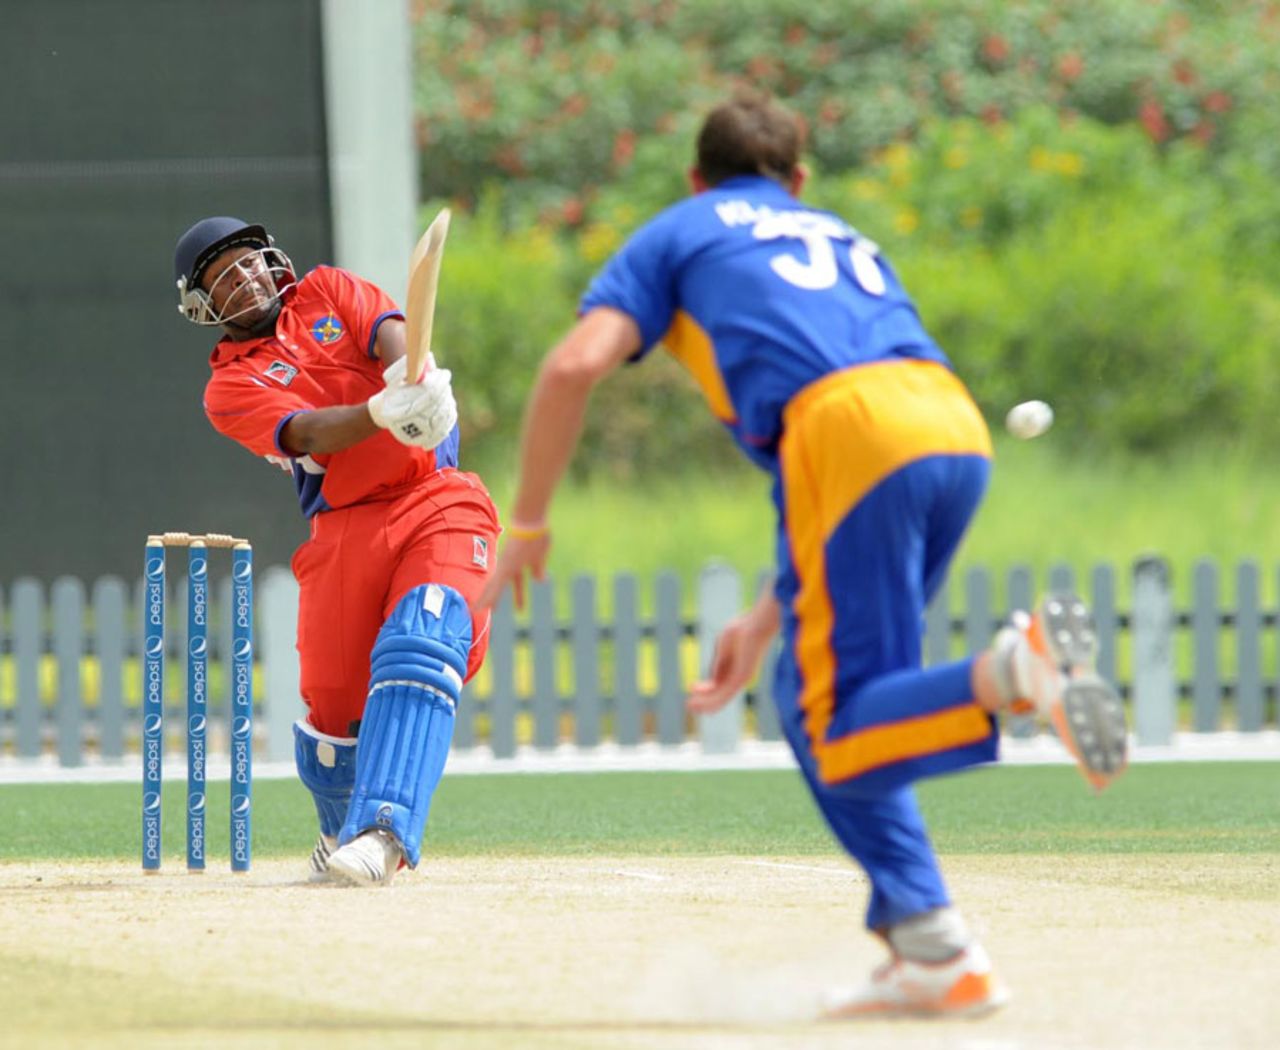 Dion Stovell made a quickfire 77 to put Bermuda's chase on track, Bermuda v Namibia, Dubai, April 12, 2011